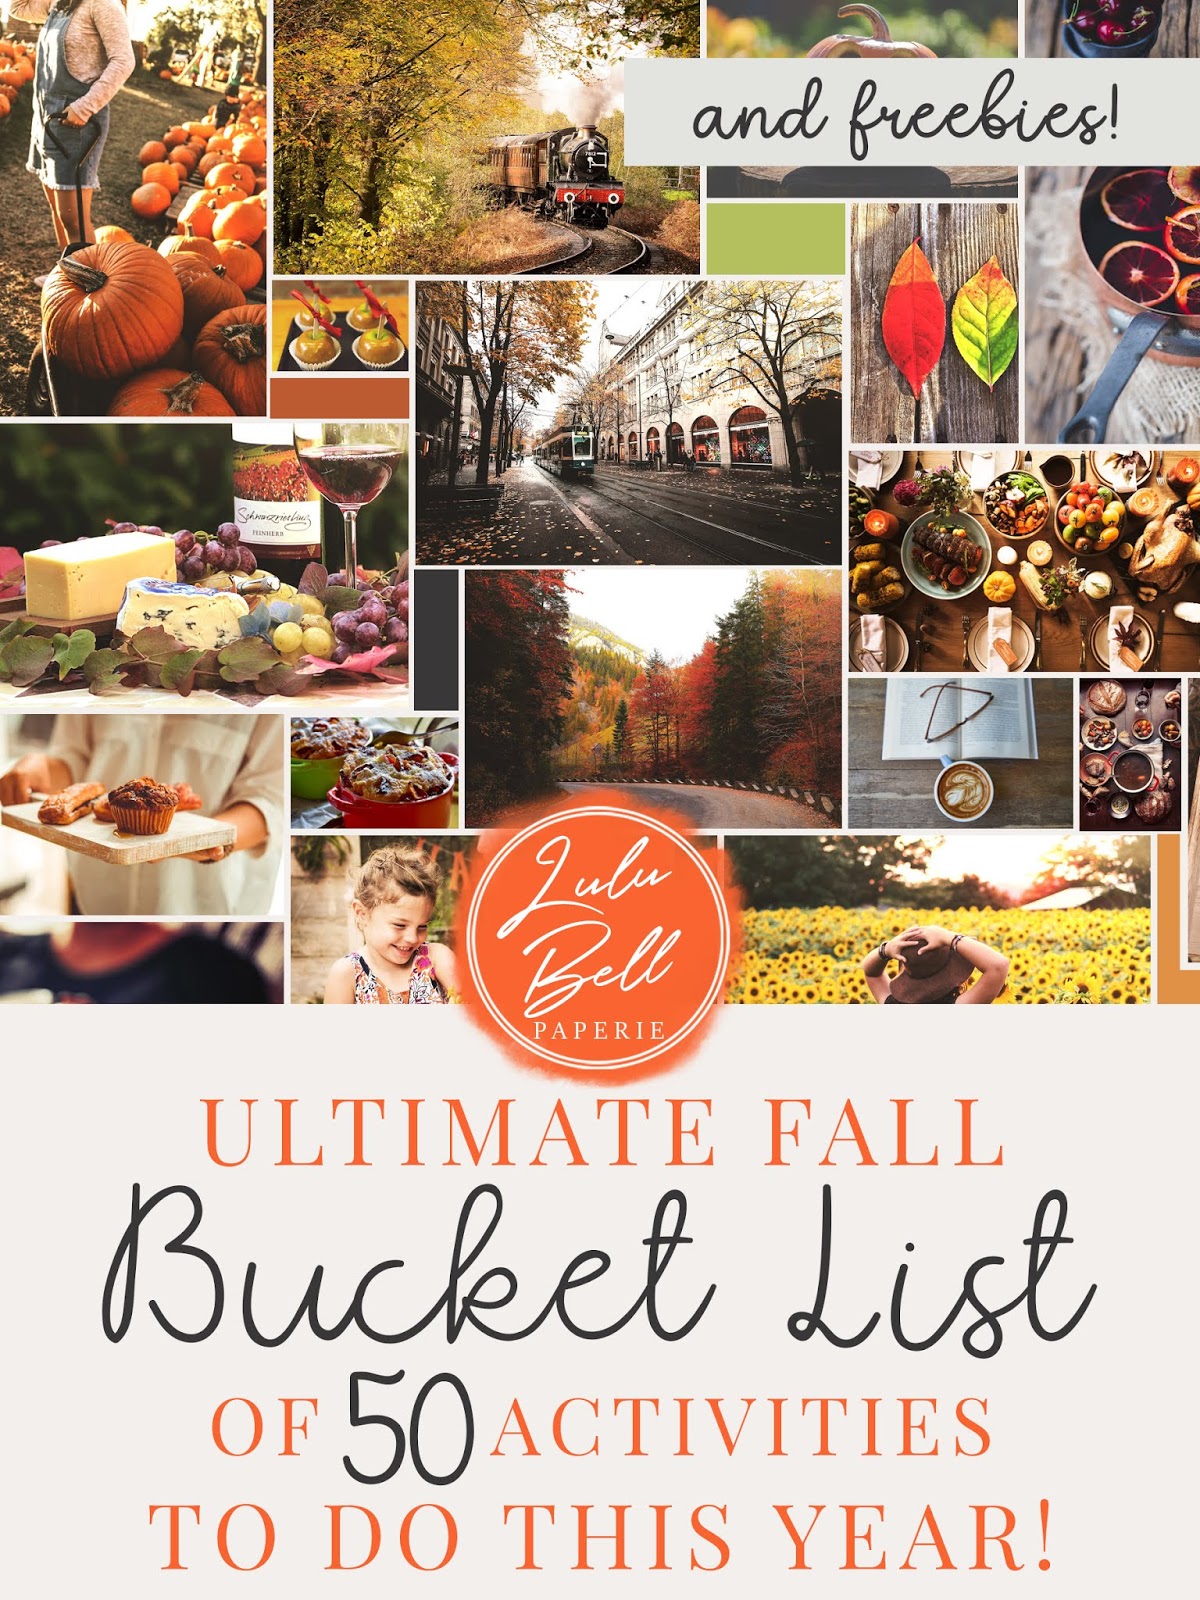 Ultimate Fall Bucket List - A List of the Top 50 Autumn Activities To Do This Year